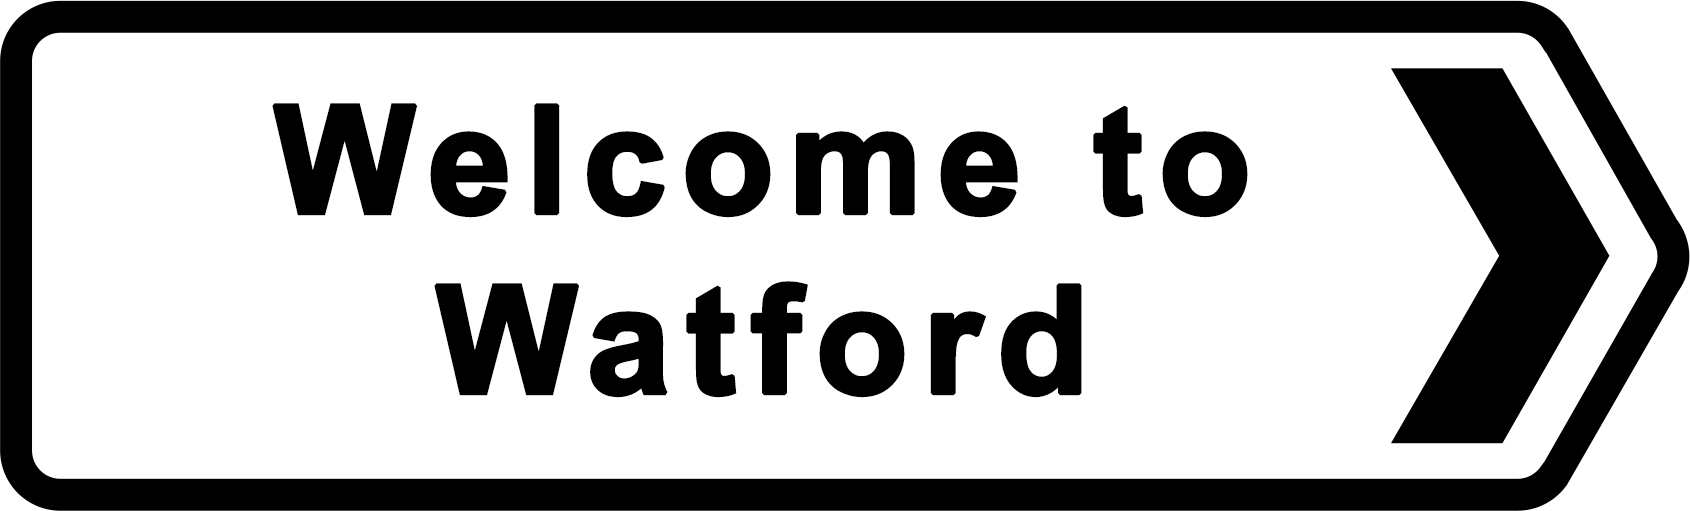 Coat of Arms of Watford Borough Council - Cheap Driving Schools Lessons in Watford, Hertfordshire, England